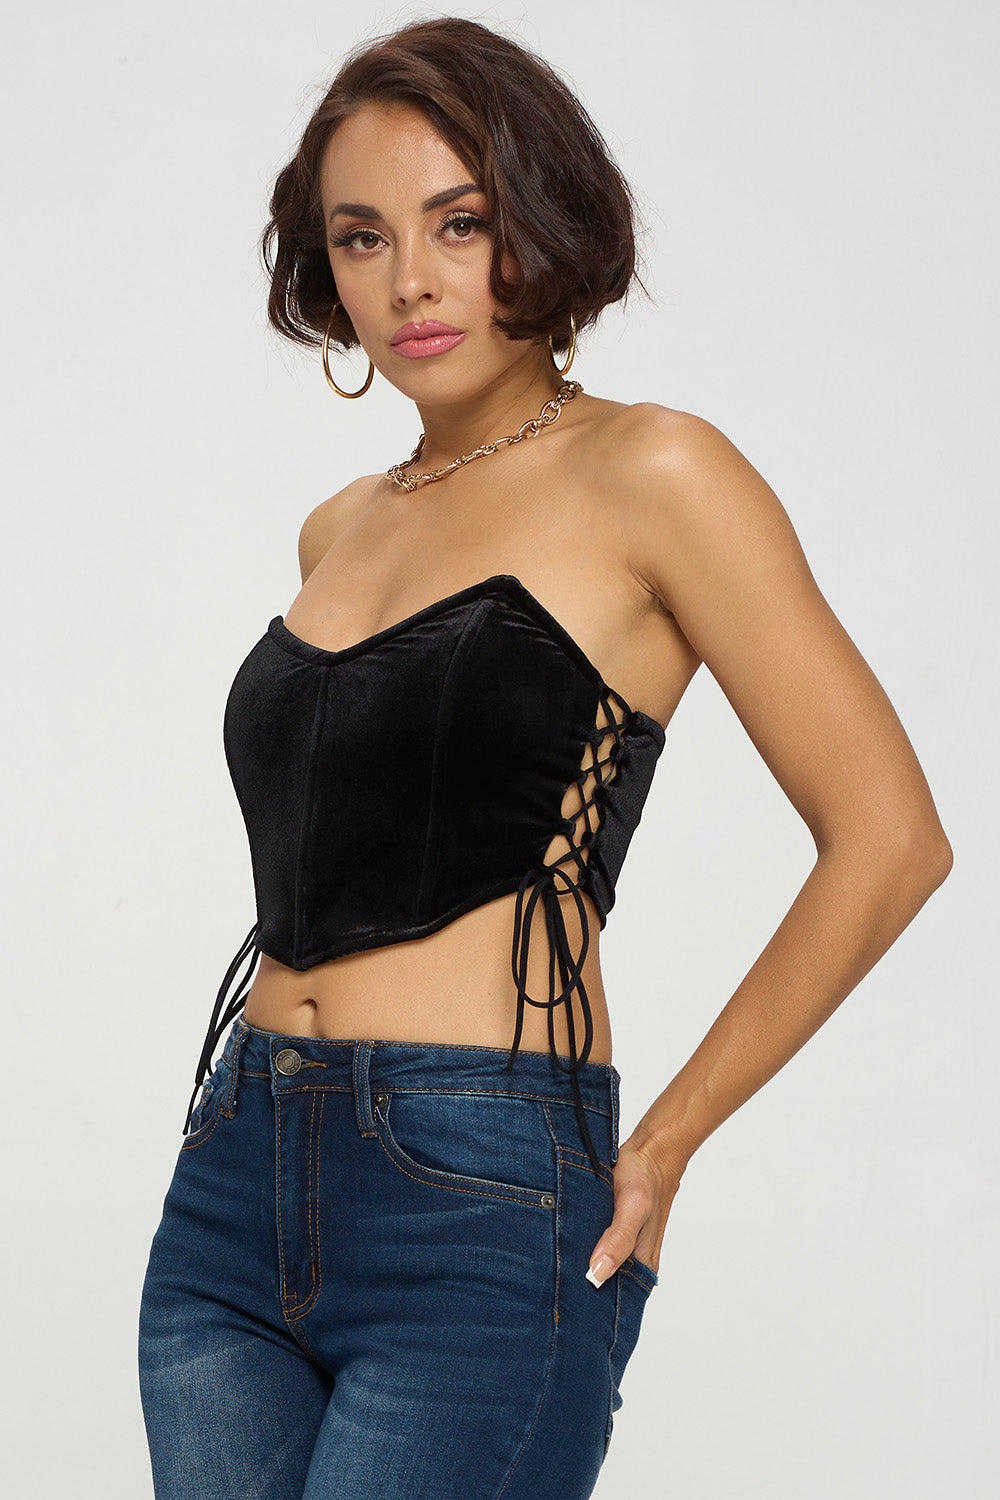 SIDE LACE UP DETAIL BONING BUSTIER TUBE TOP – OhYes Fashion